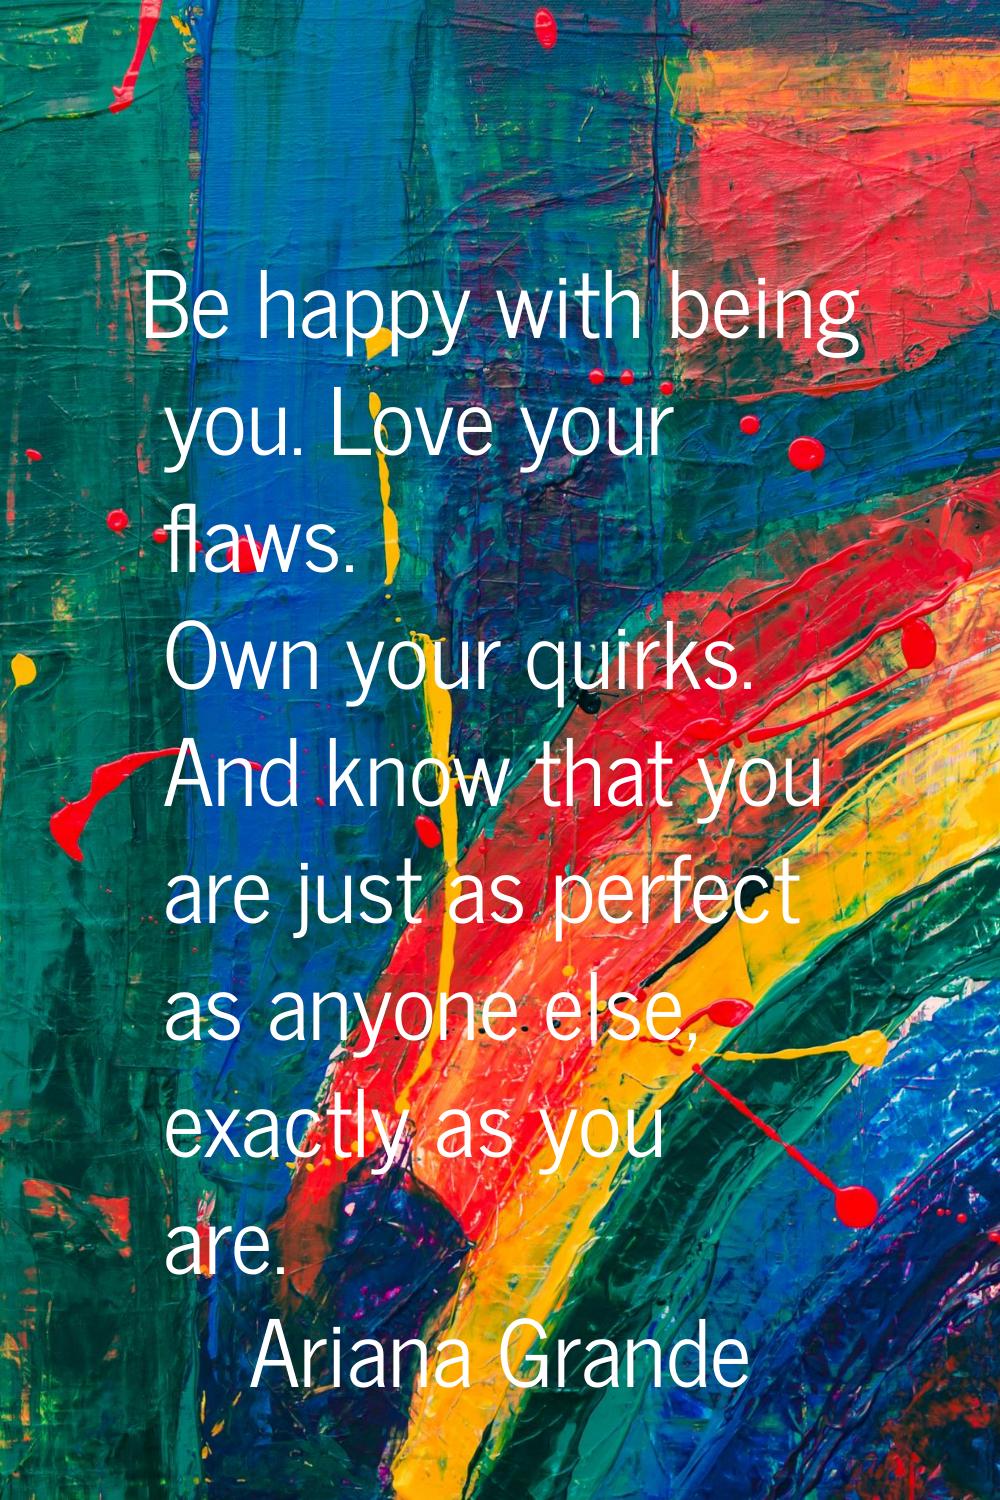 Be happy with being you. Love your flaws. Own your quirks. And know that you are just as perfect as